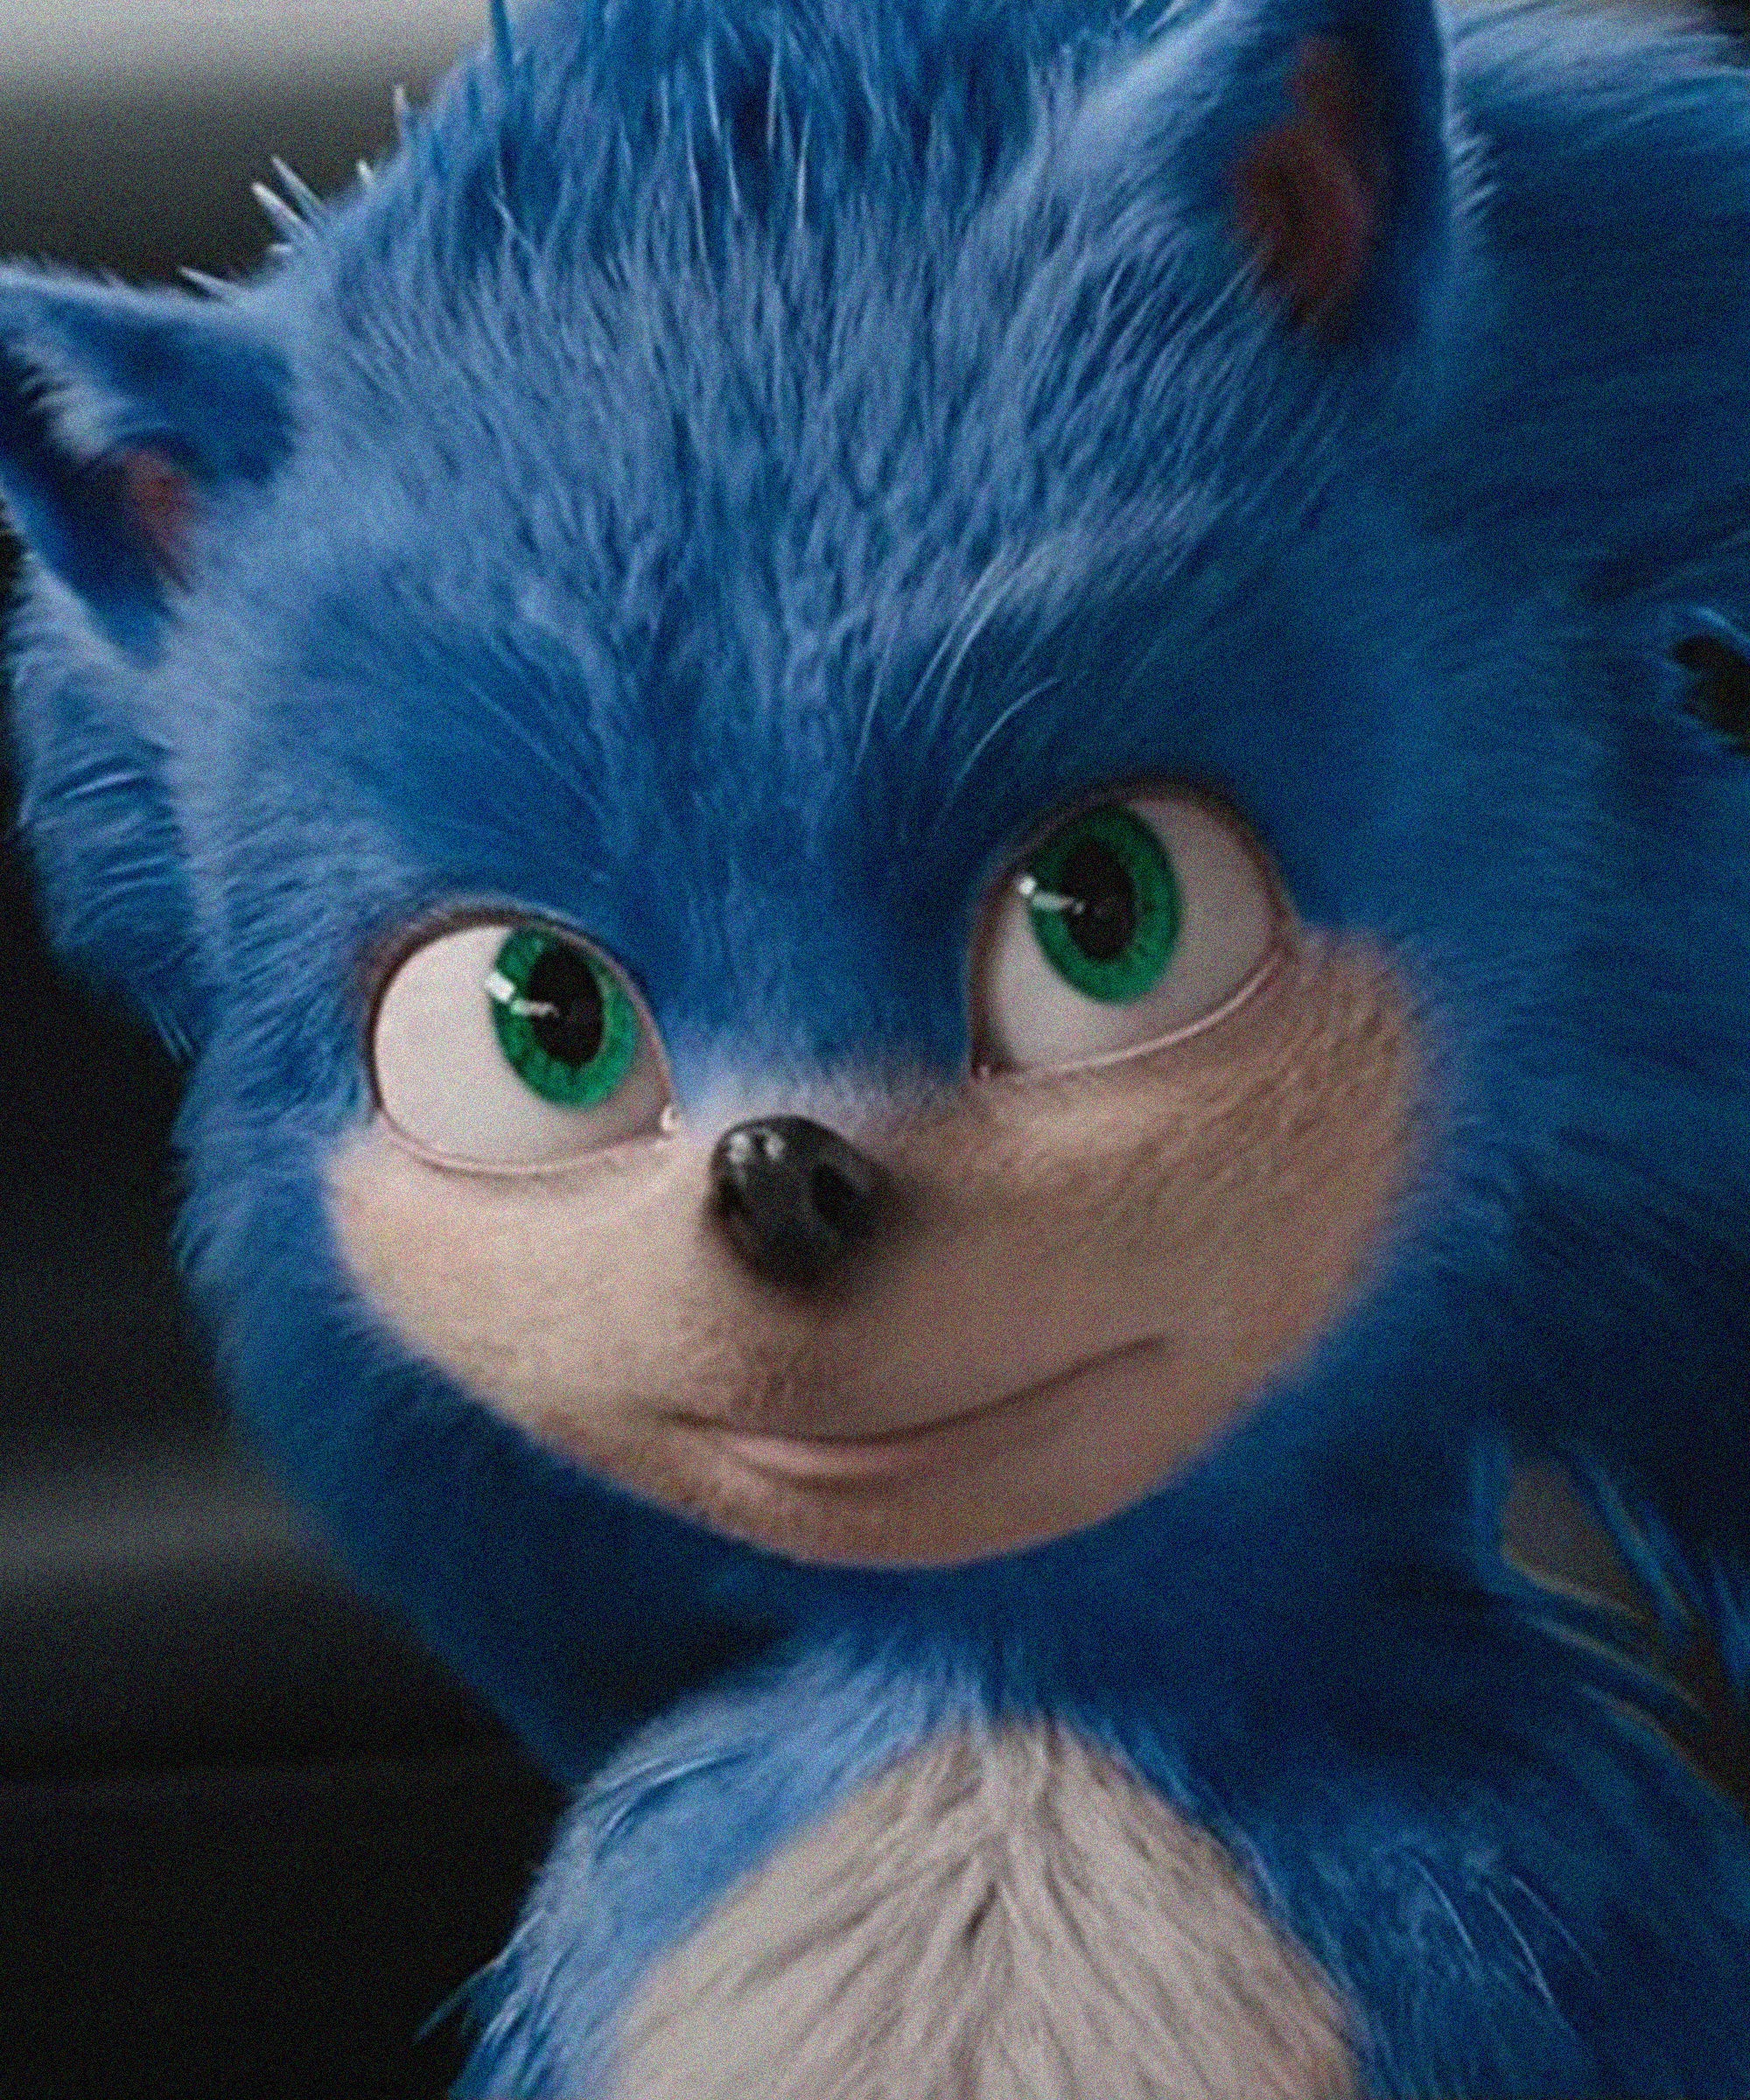 Everything that's wrong with the Sonic the Hedgehog movie trailer